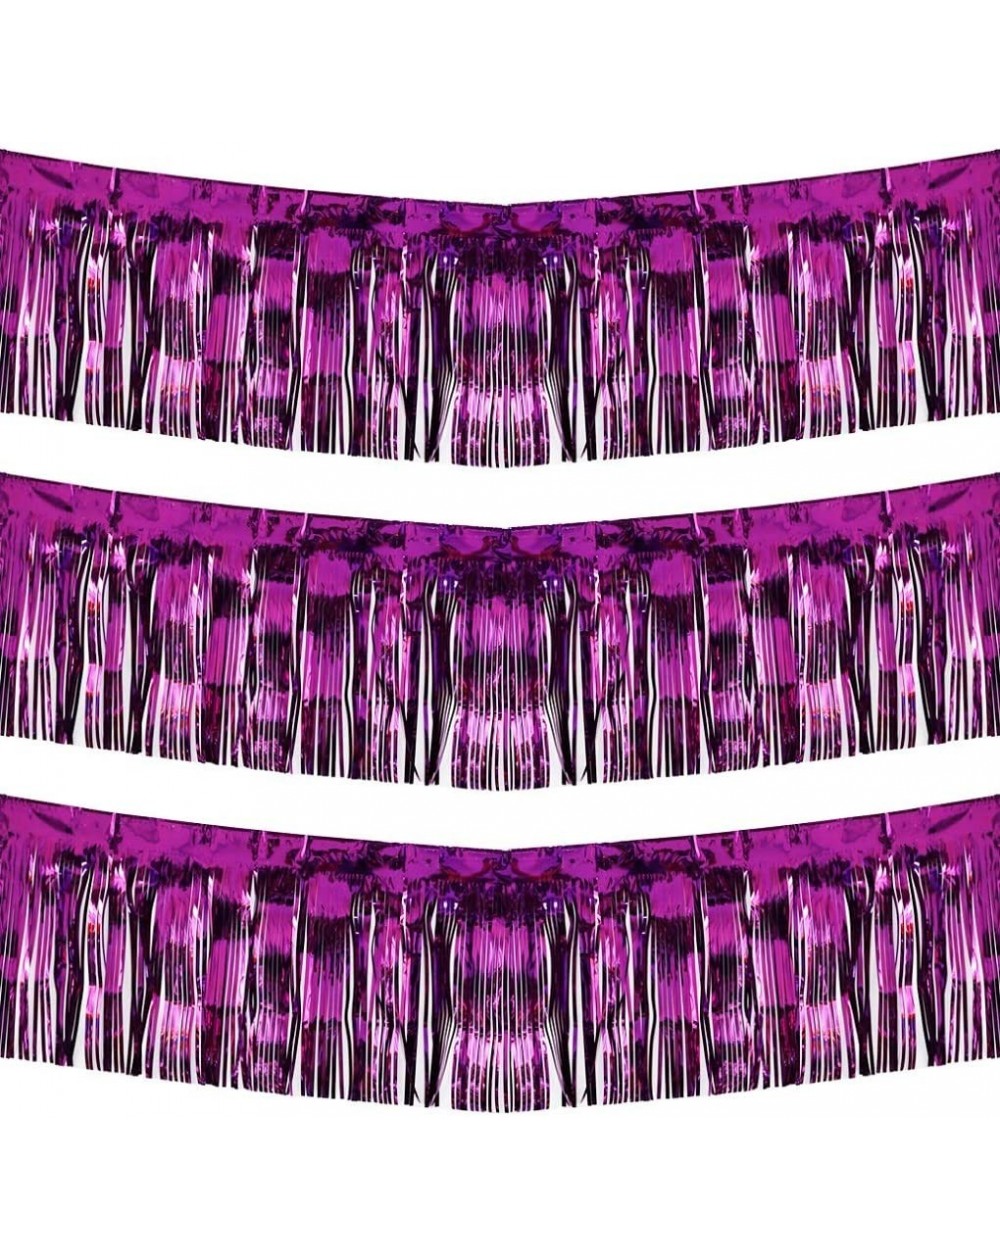 Banners & Garlands 10 Feet by 15 Inch Purple Foil Fringe Garland - Pack of 3 - Shiny Metallic Tinsel Banner - Ideal for Parad...